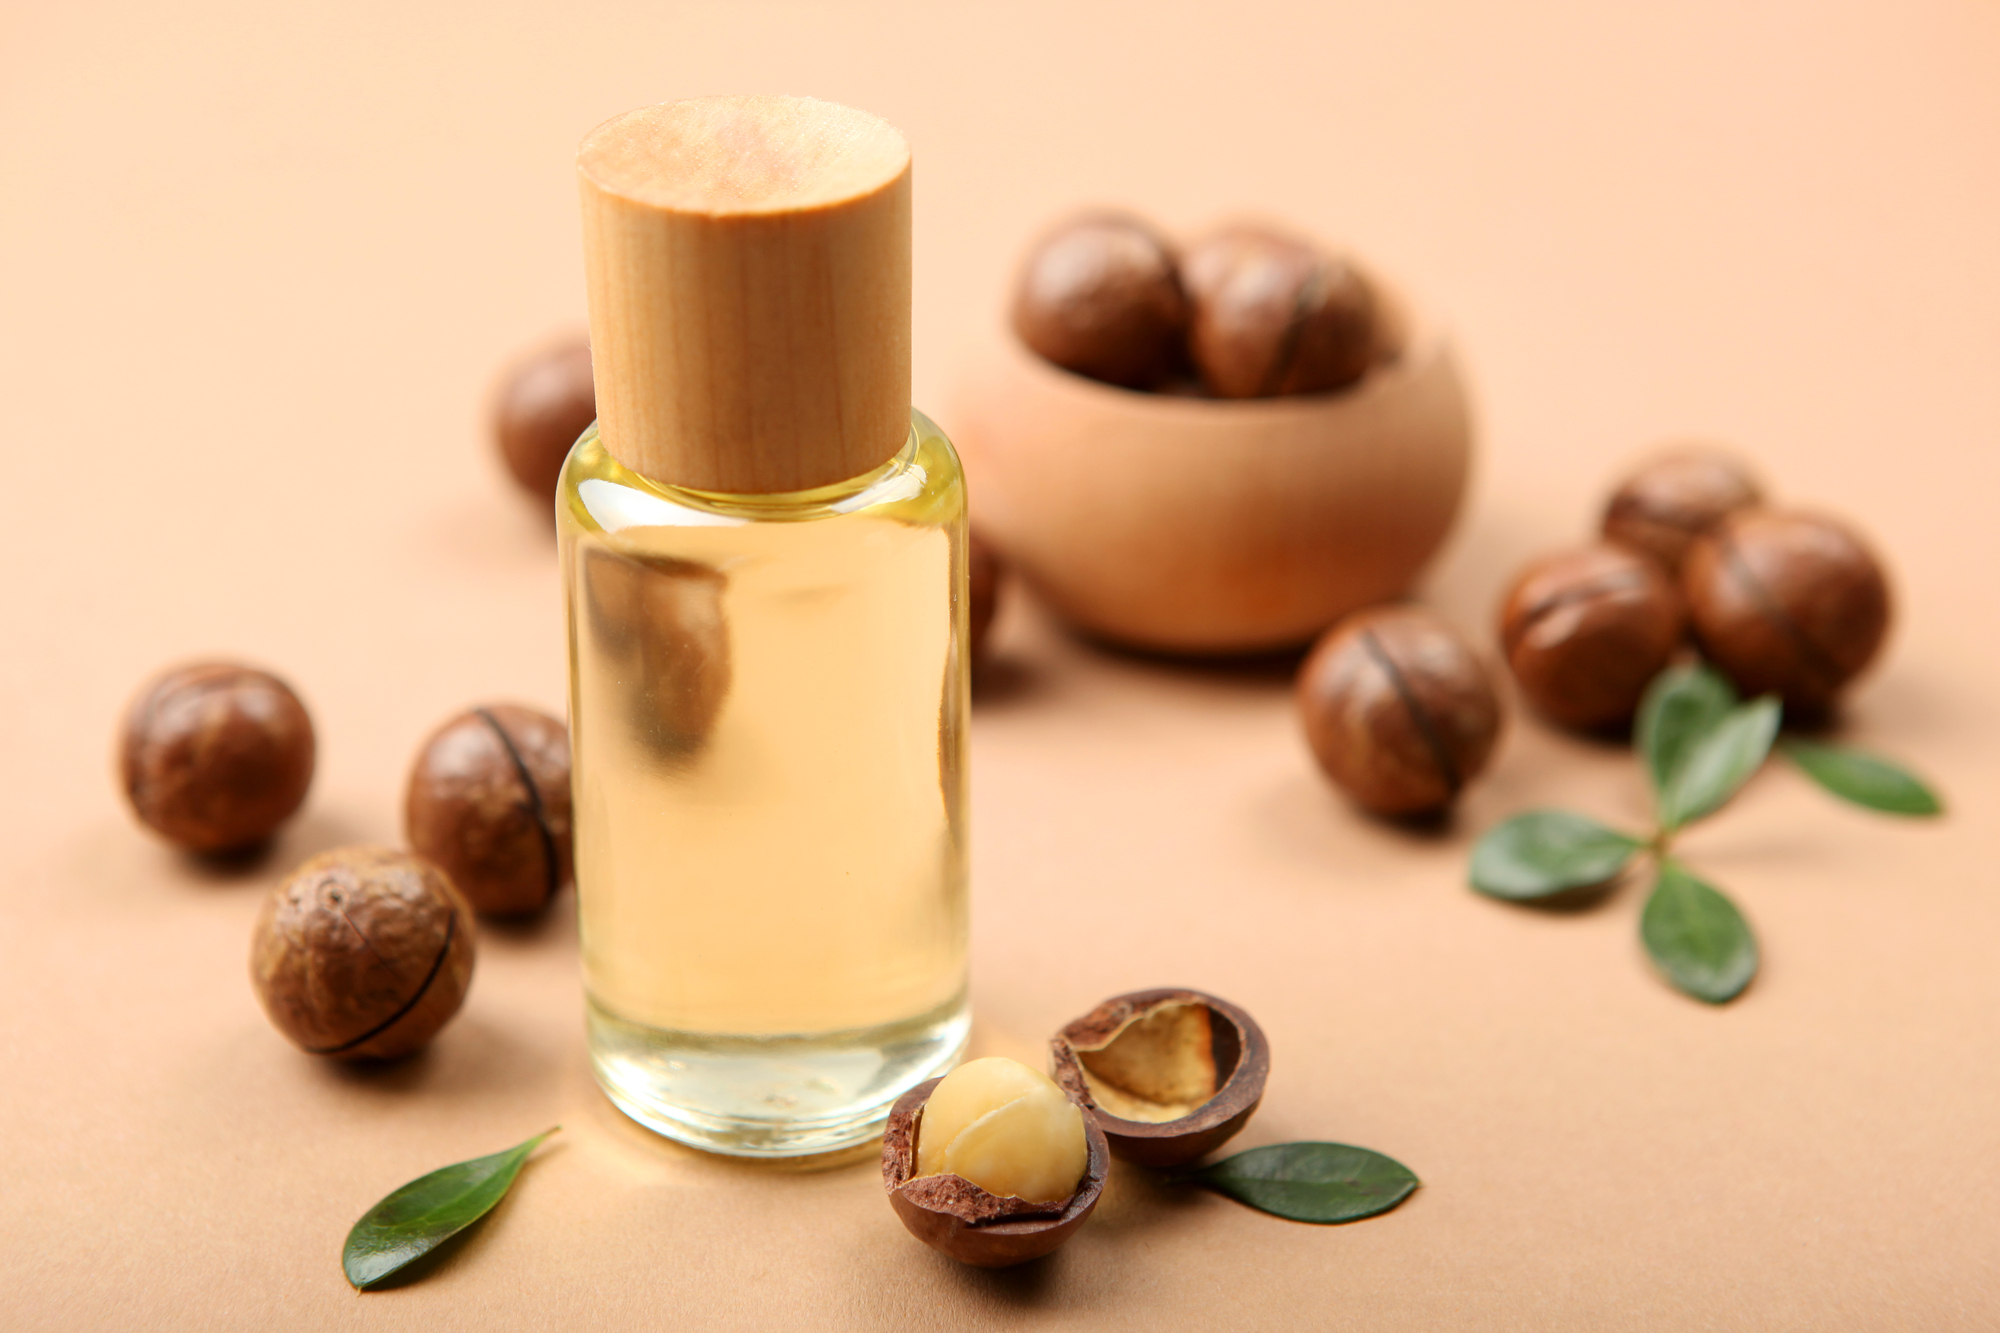 Macadamia oil – properties, effects and uses